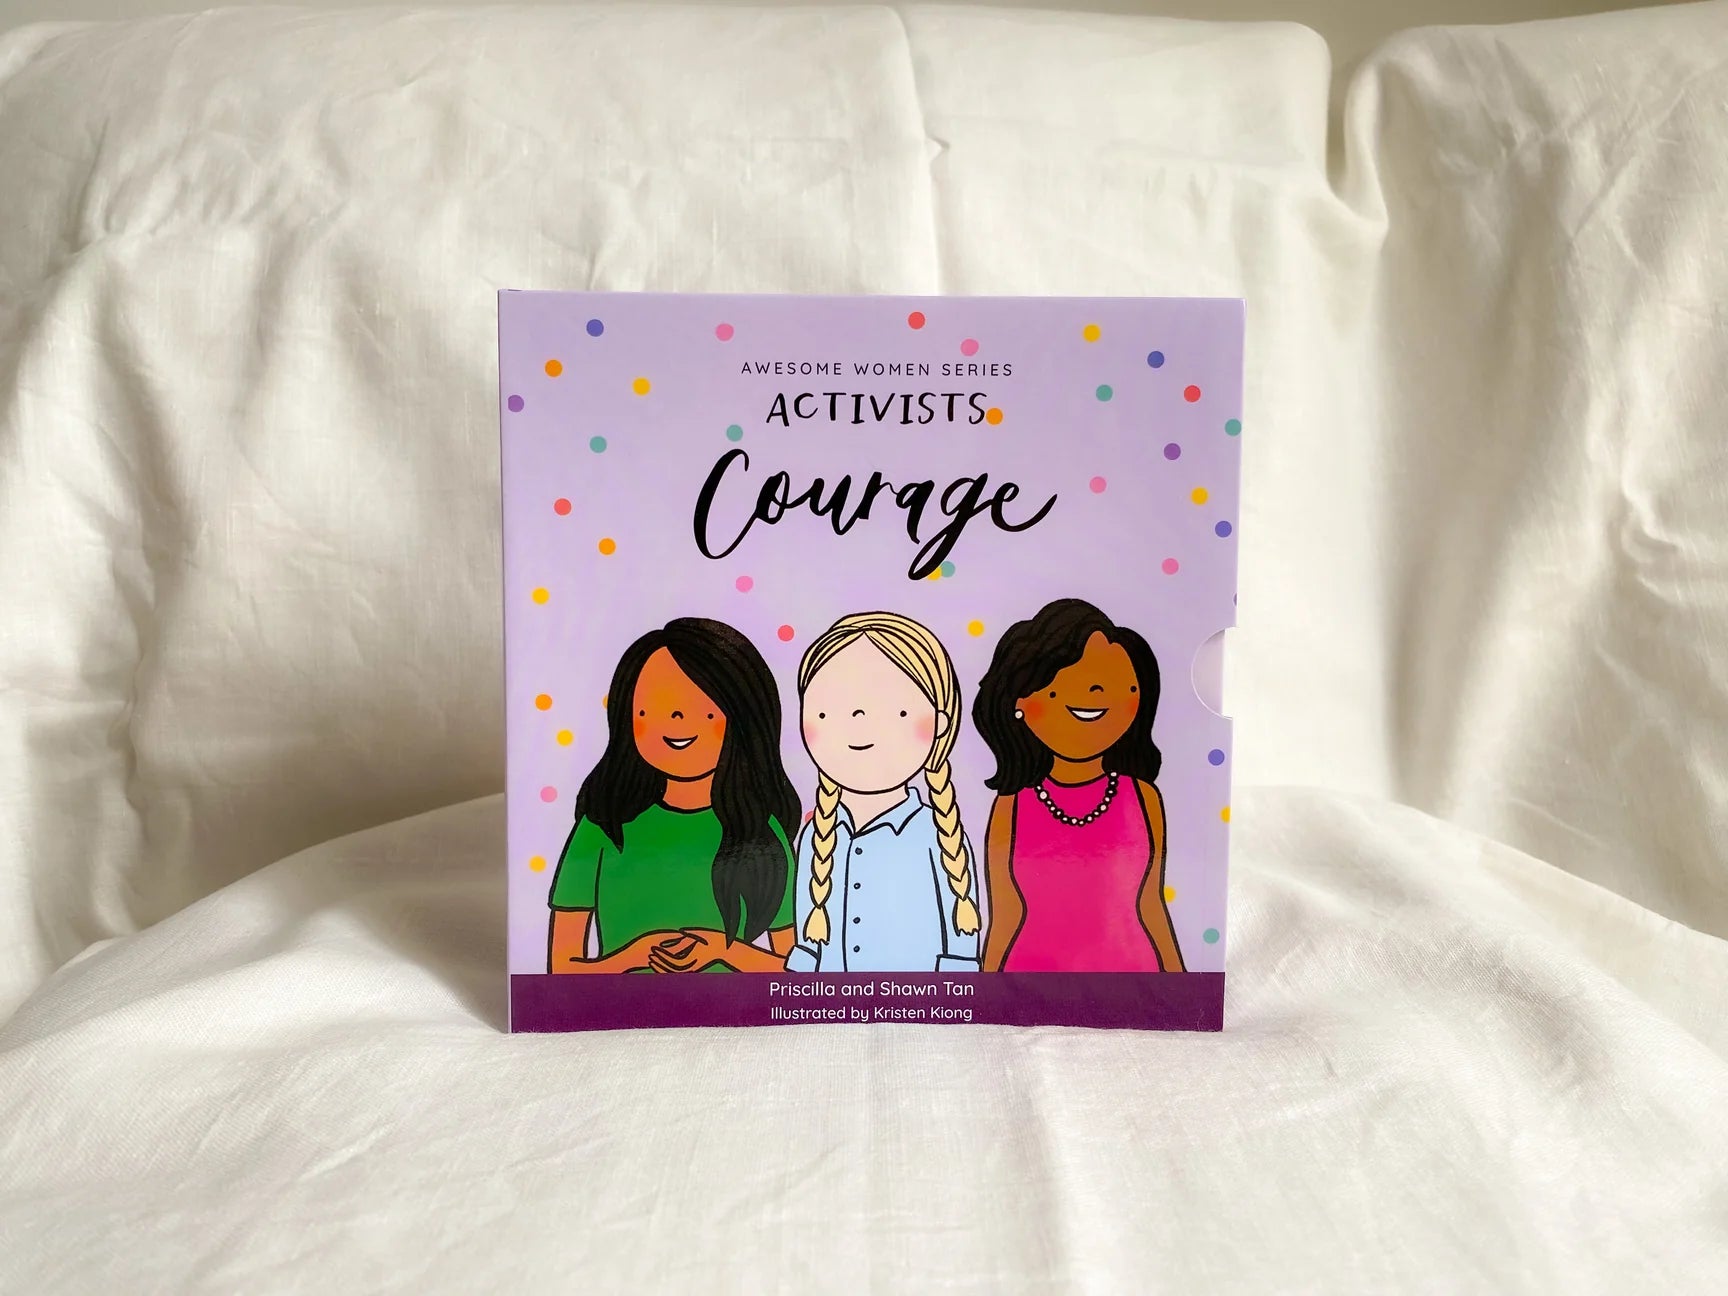 Awesome Women Series Activists | Courage (Amal Clooney, Greta Thunberg, Michelle Obama)